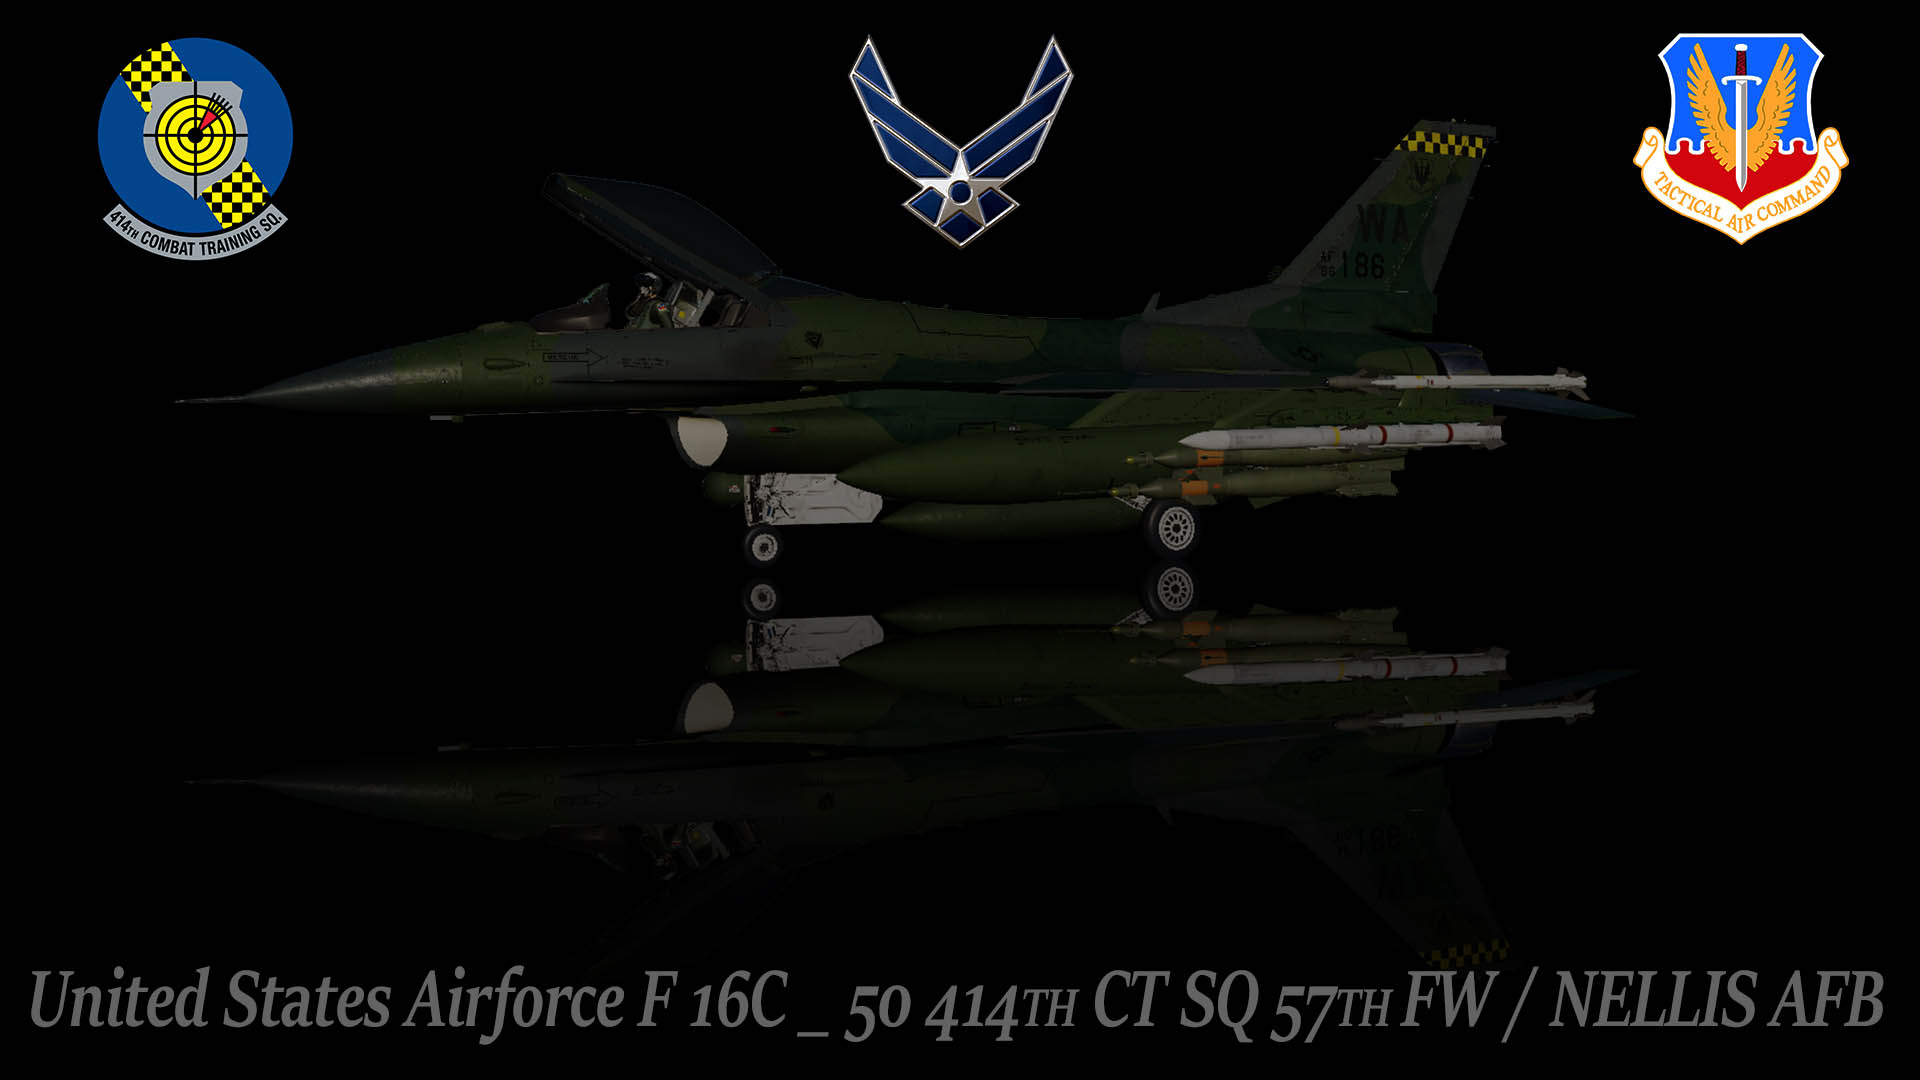 414 CT 57TH FW IN F16A 80s test cammo